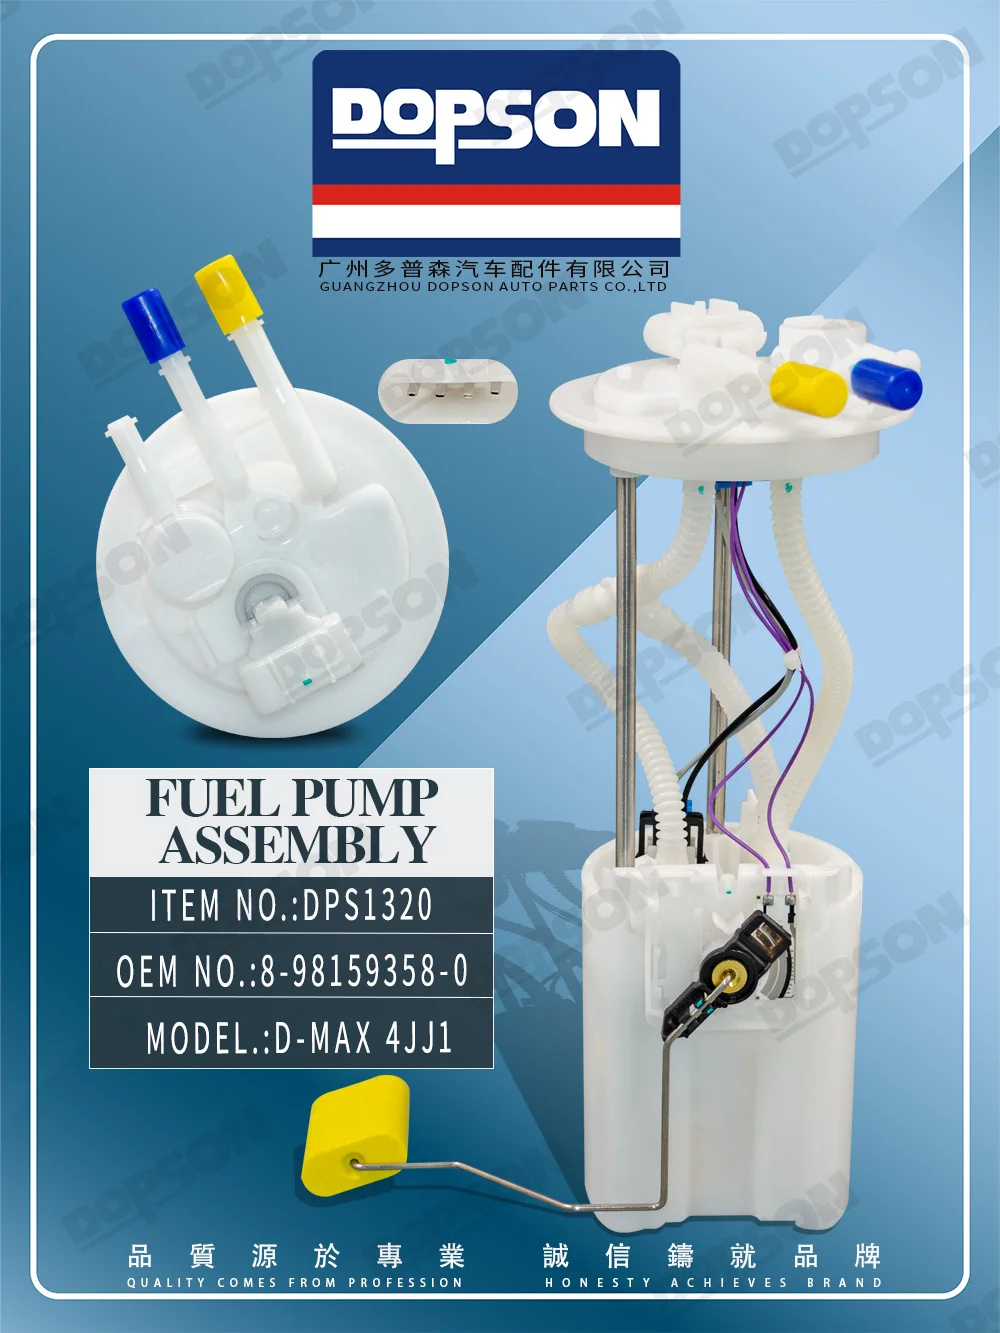 

High Quality Complete Intank Fuel Feed Pump Assembly Moduel Dopson Auto Parts OEM 8-98159358-0 Fits For D-MAX 4JJ1 Model